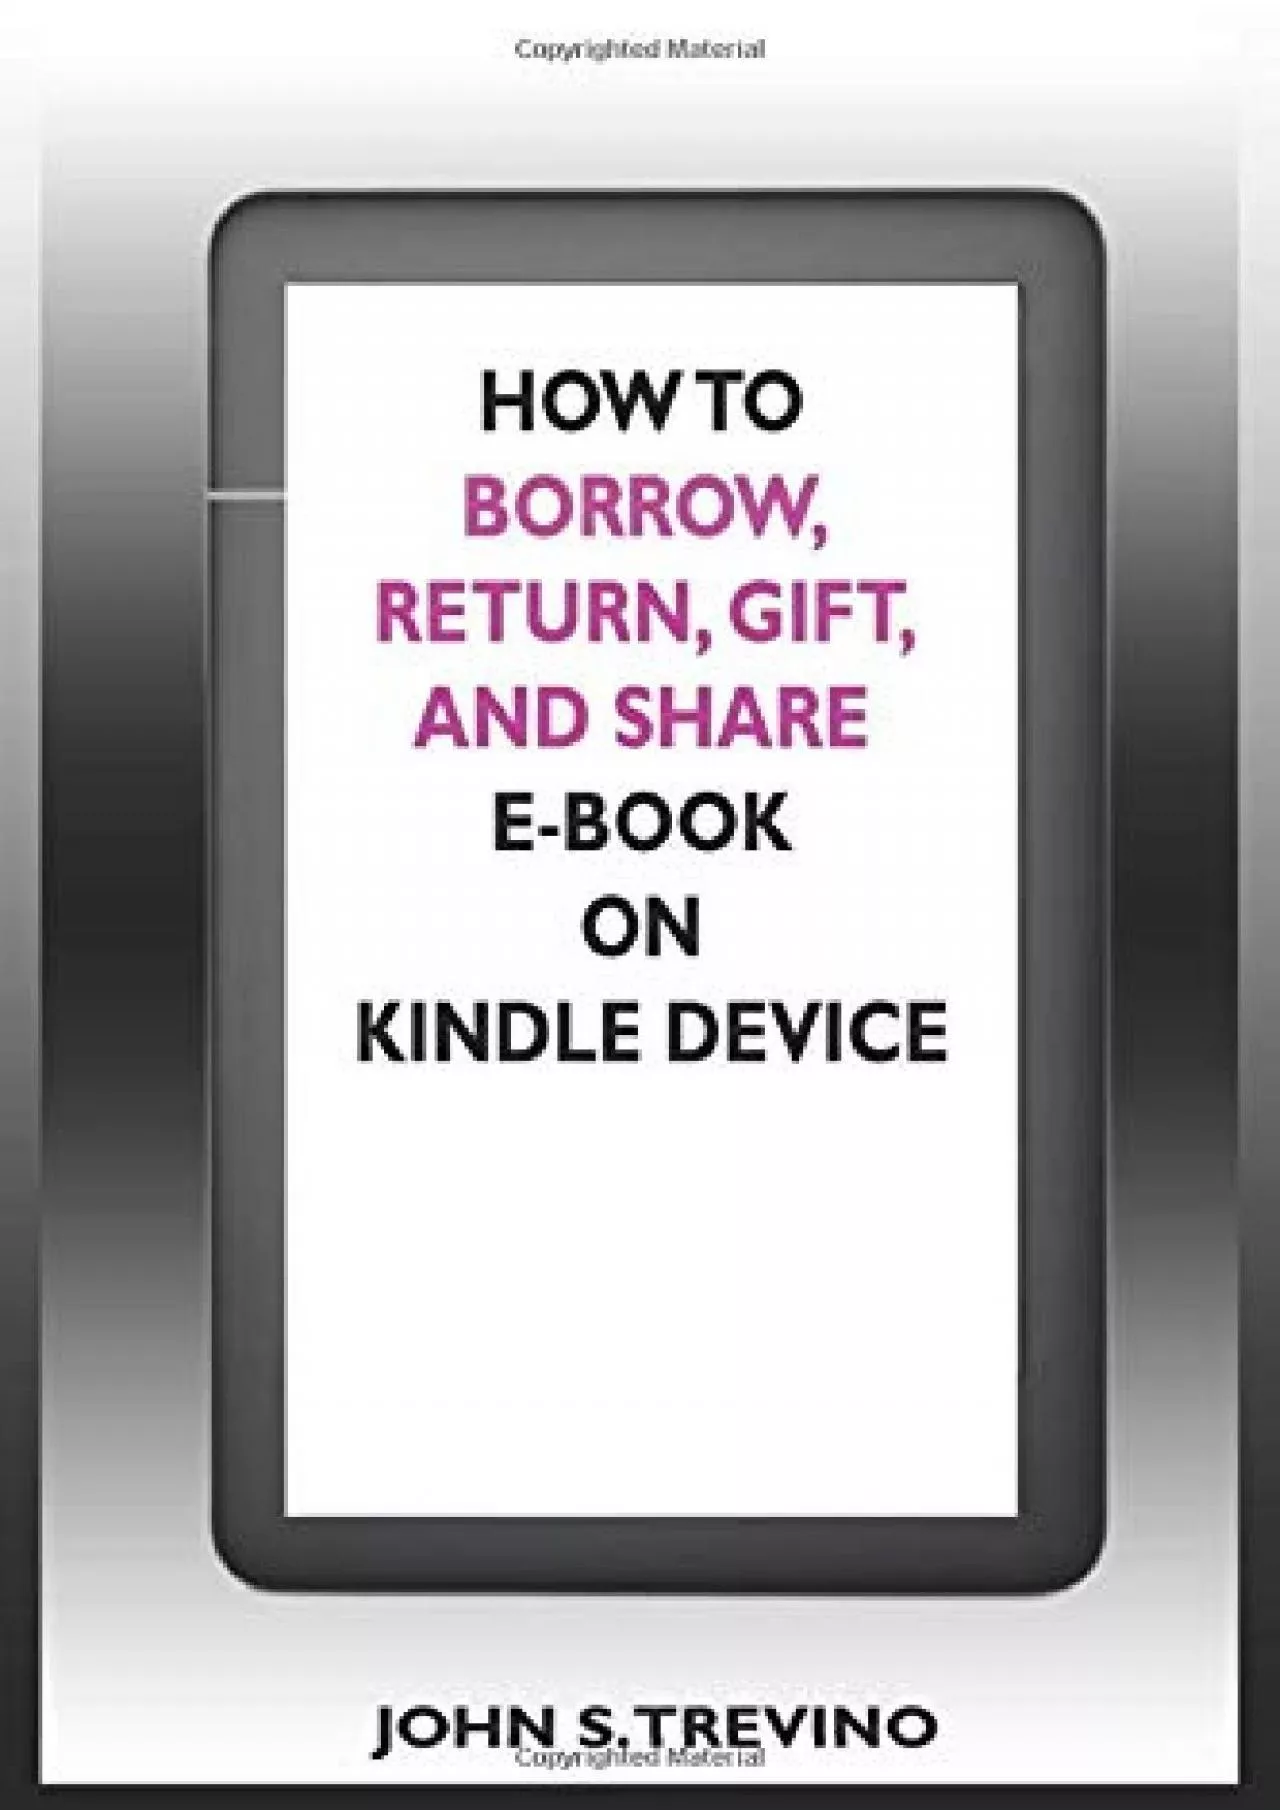 [BEST]-HOW TO BORROW, RETURN, GIFT, SHARE E-BOOK ON KINDLE DEVICE: A Complete Step By